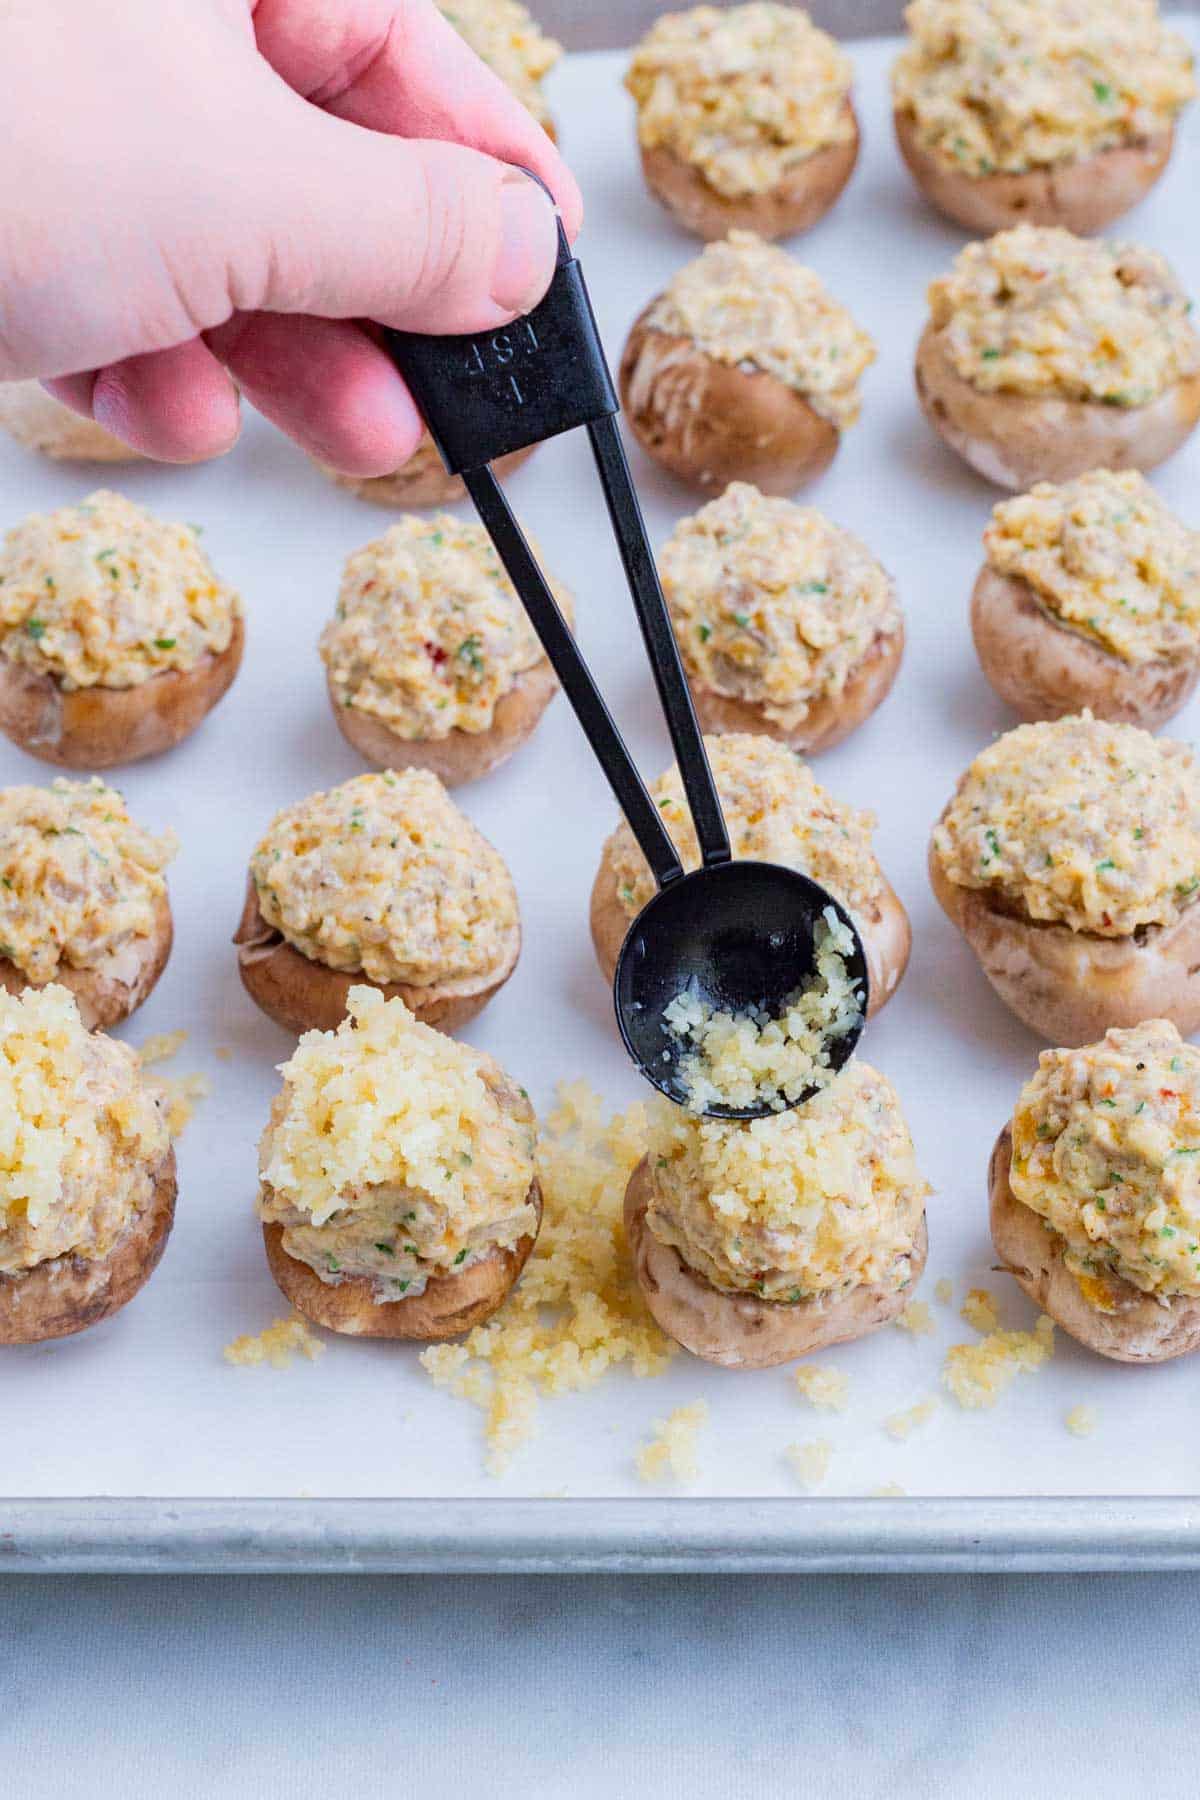 The cheesy breadcrumbs are sprinkled on top of the stuffed mushrooms.